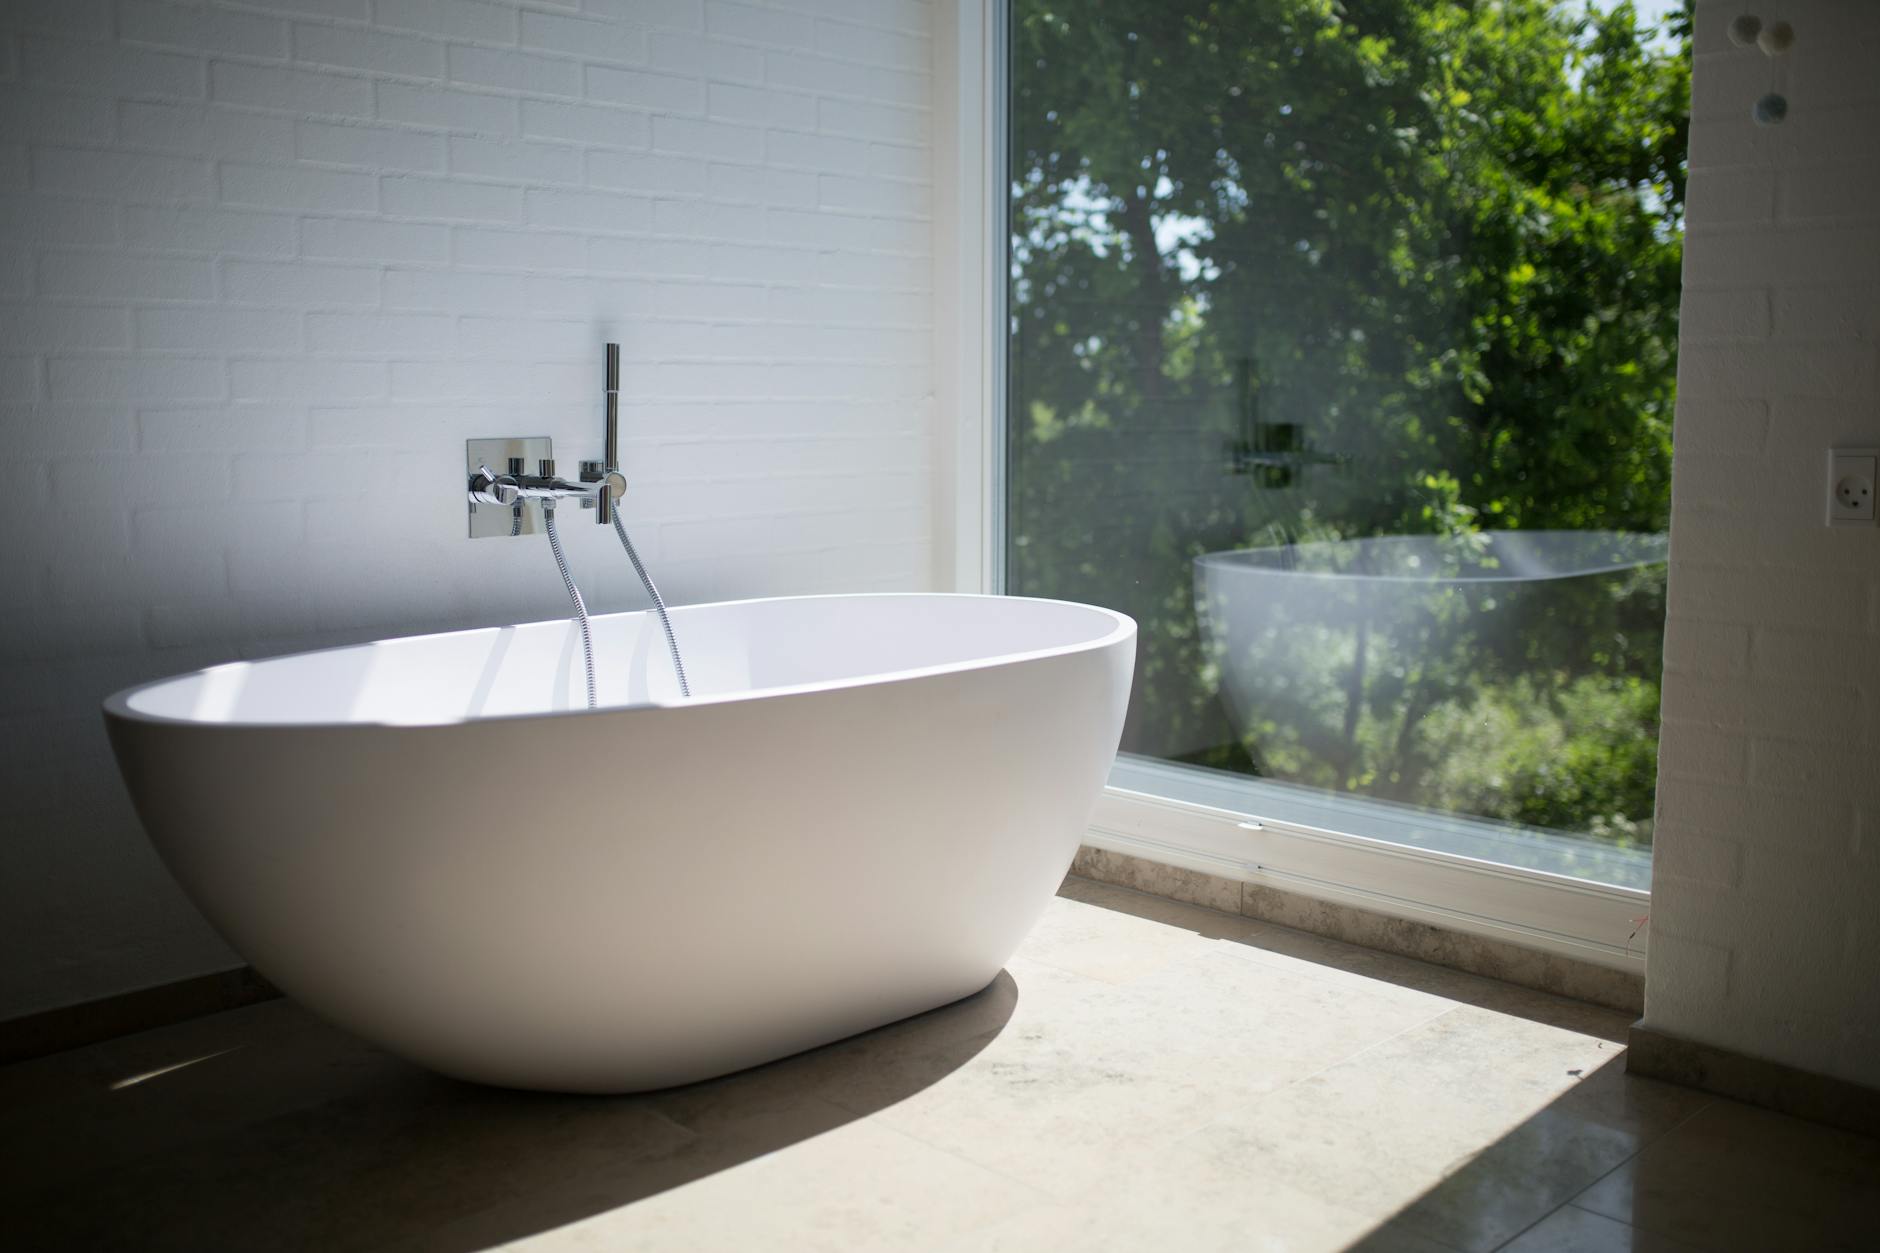 8 Ways to Make Your Bathroom More Luxurious on a Budget